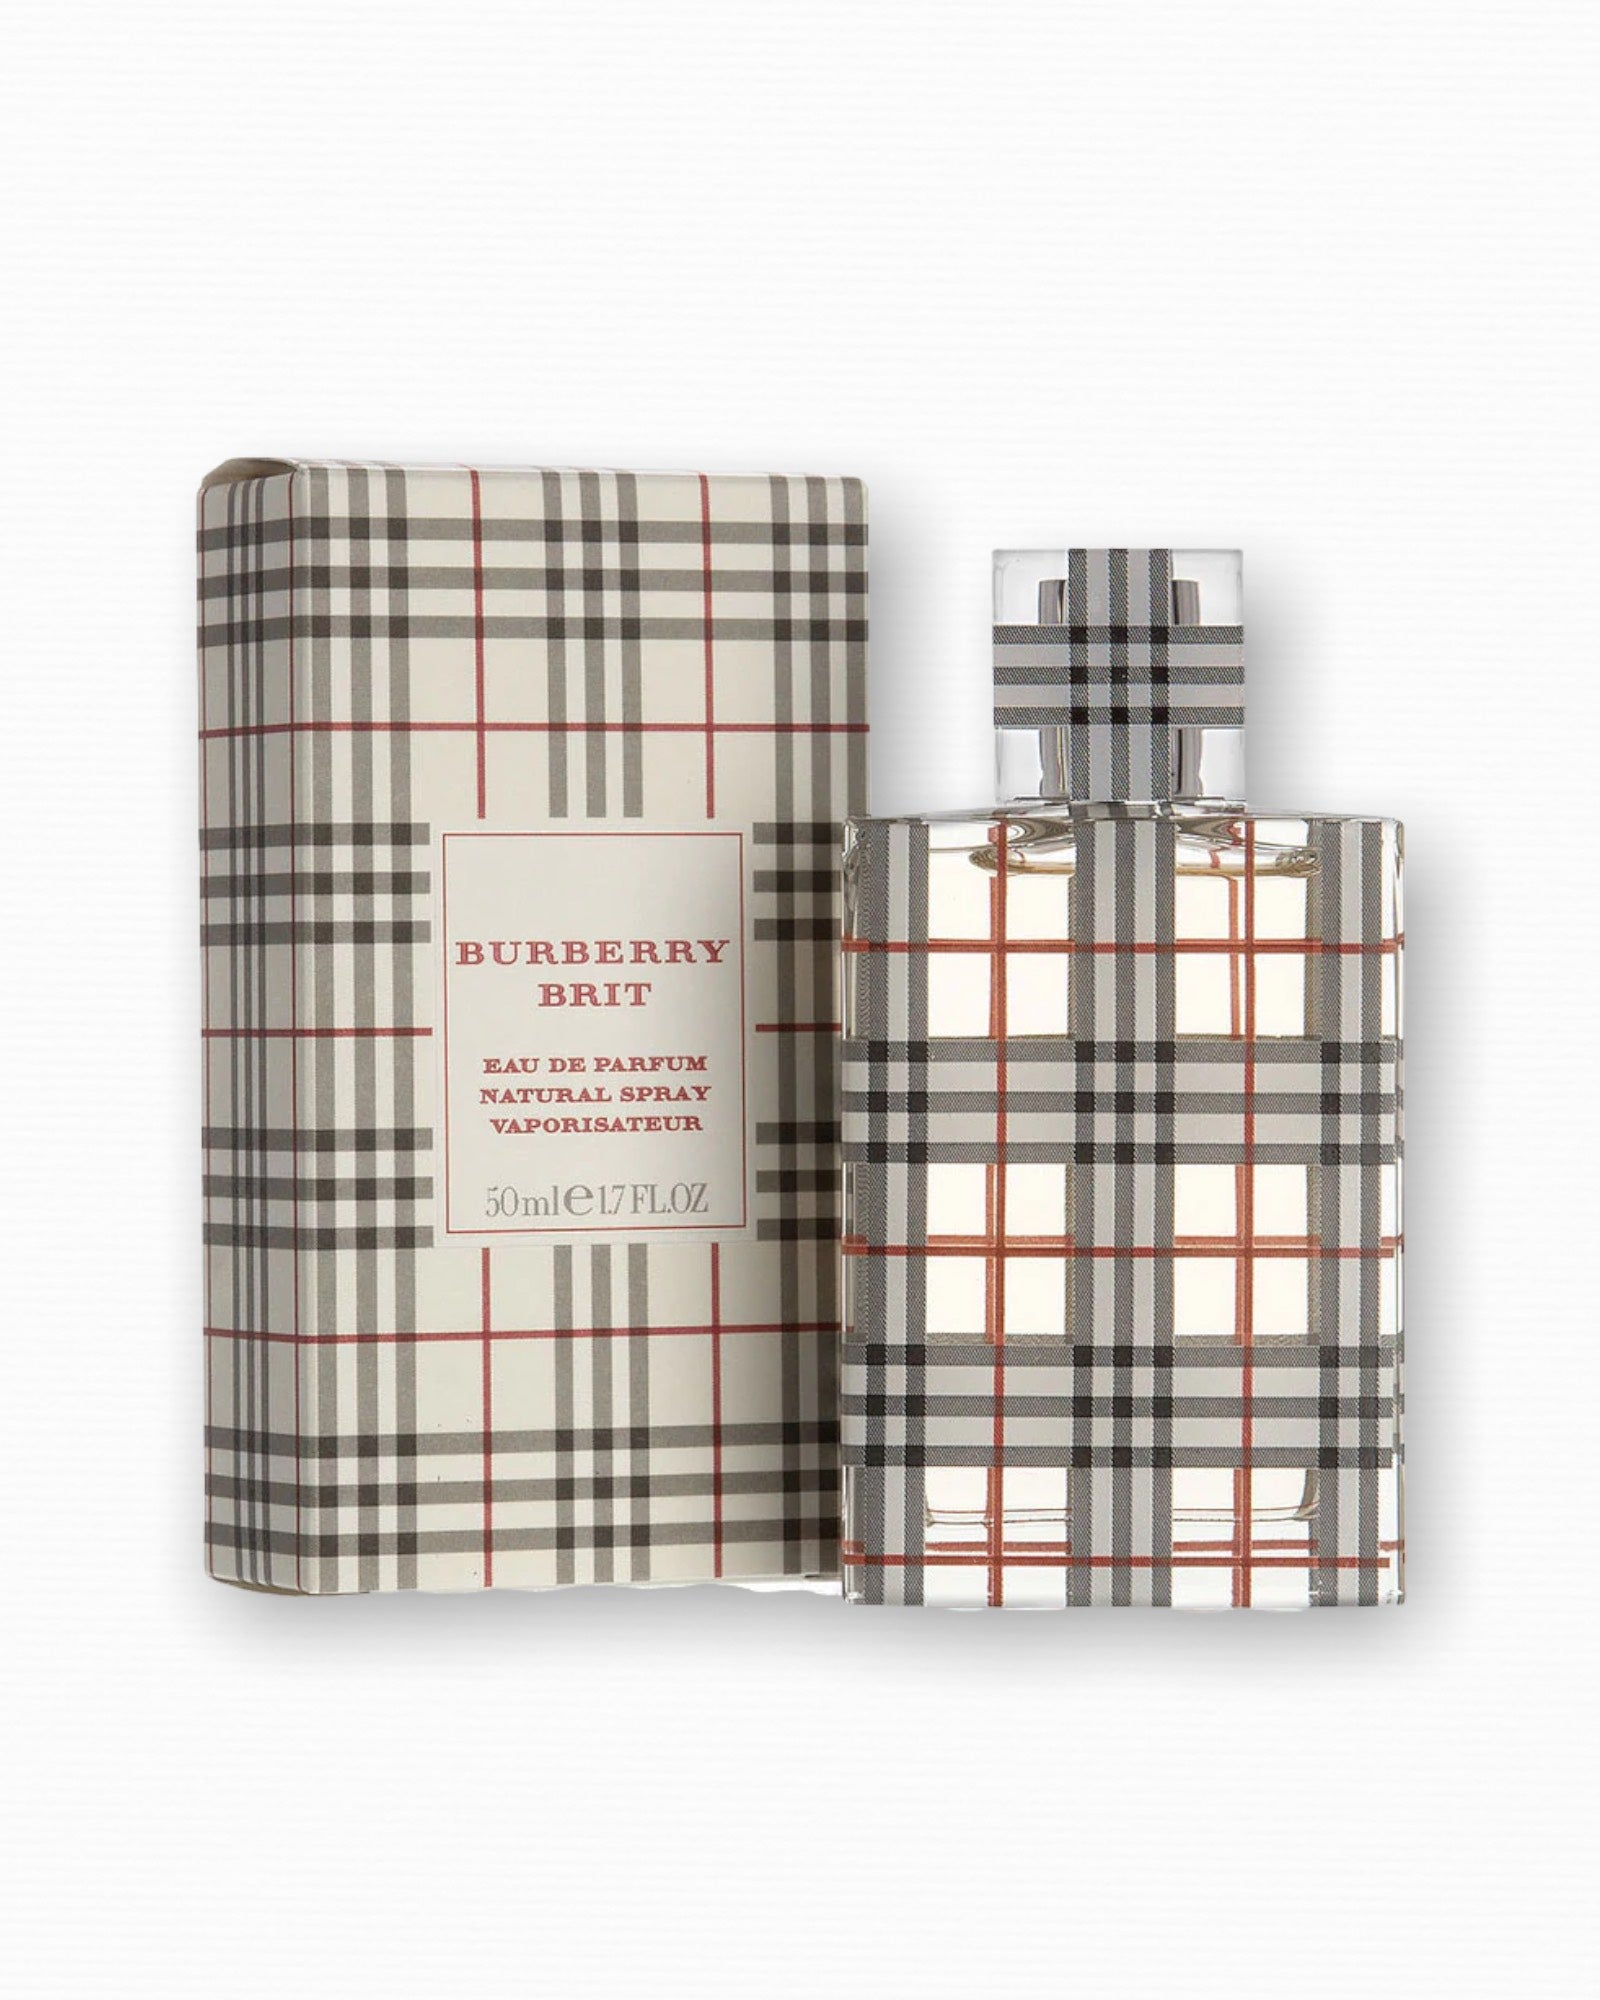 Burberry Brit by Burberry for Women EDP 1.7 oz